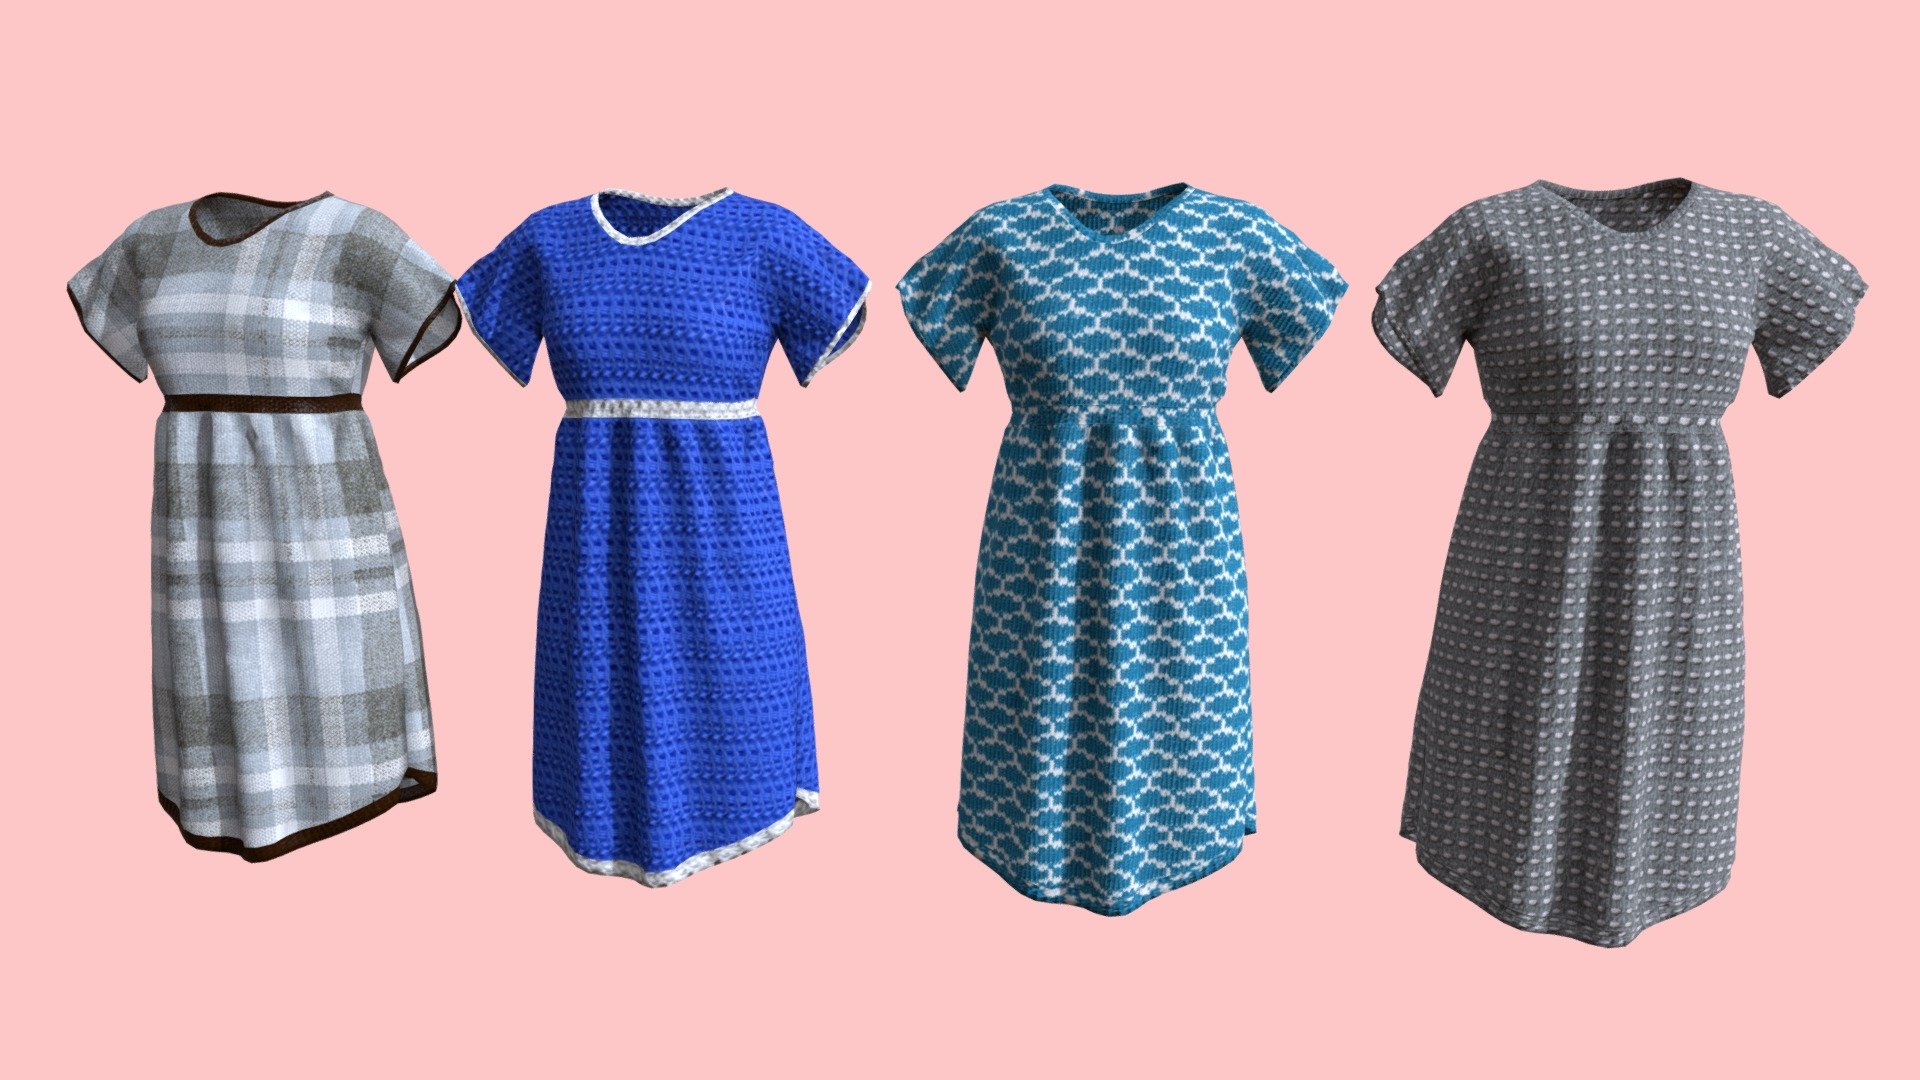 Clothes created in Blender. 
It includes a set of 4 texture designs in different resolutions, a 3D model without thickness and a 3D model with thickness.

This model is available in the following file formats:


.blend (Blender native format)
.fbx (Autodesk fbx)
.obj (Object file with mtl)
.abc (Alembic)
.dae (Collada)
.stl (Stereolithography)
.glb

There is a zip file with some renders in PNG format with alpha/transparency.
The model has a non-overlapping UV Map.
The polygons in the model are Tris.

Polygons (3D model without thickness)


Verts 3470
Faces 6817
Tris 6817

The model has PBR textures: Base Color, Metallic, Roughness, Ambient Occlusion, Specular, Normals OpenGl and DirectX Map.

The textures are in PNG format and they are available in these dimensions:


2048x2048
1024x1024
512x512

Dimensions of the 3D model: 0.541m x 0.269m x 0.877m - Clothes n5 - Buy Royalty Free 3D model by GattalupaGames 3d model